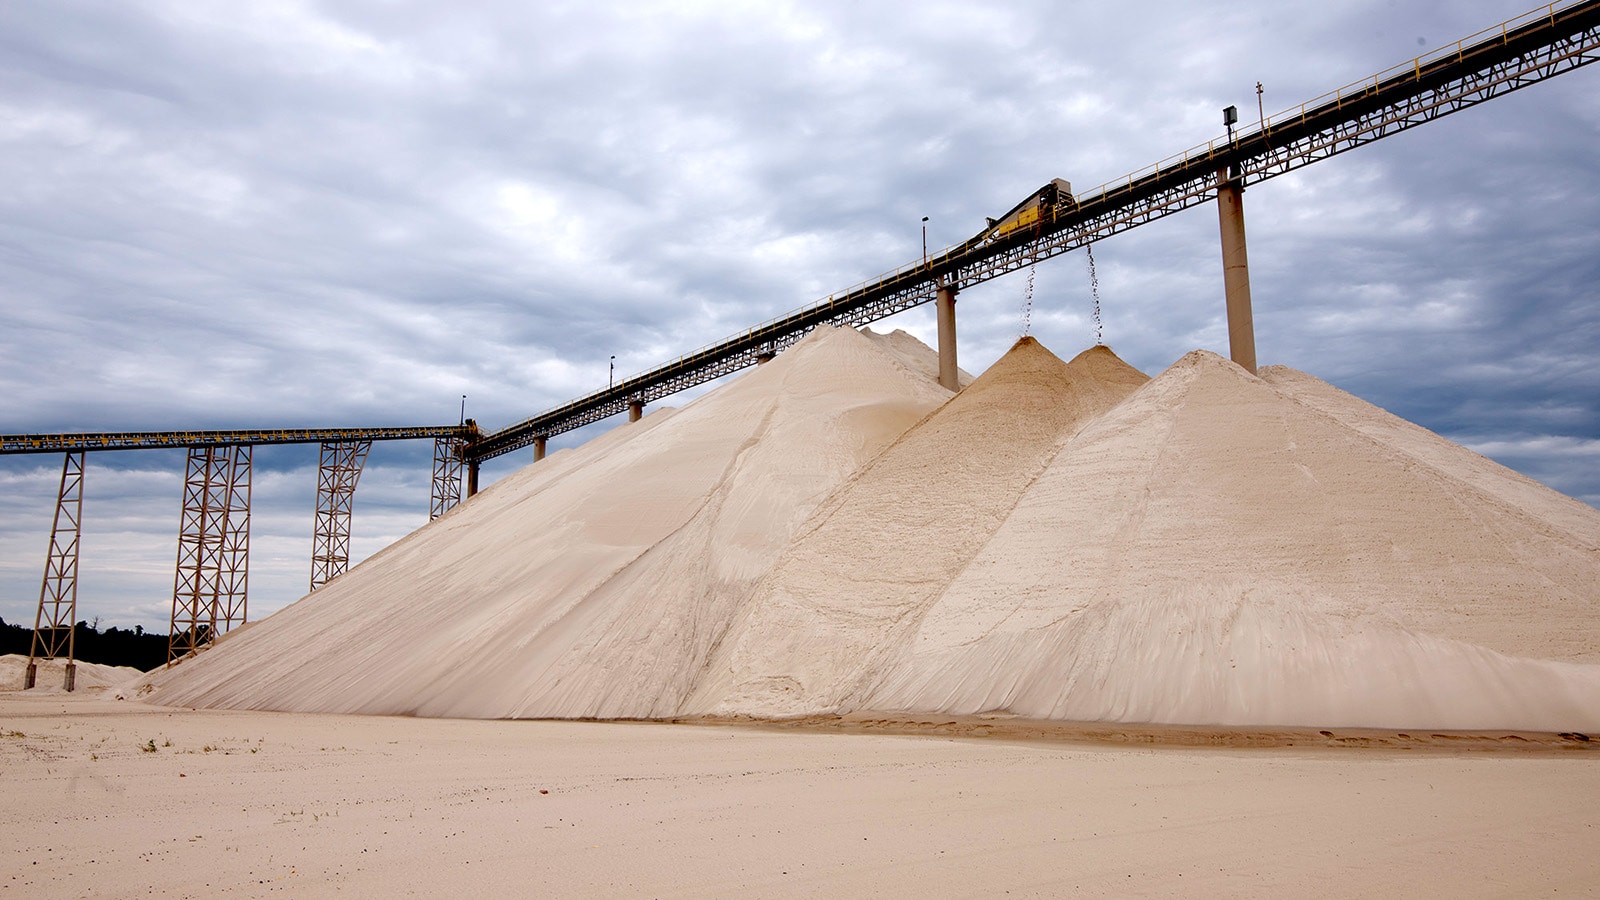 A conveyer drops loads onto already massive piles of sand